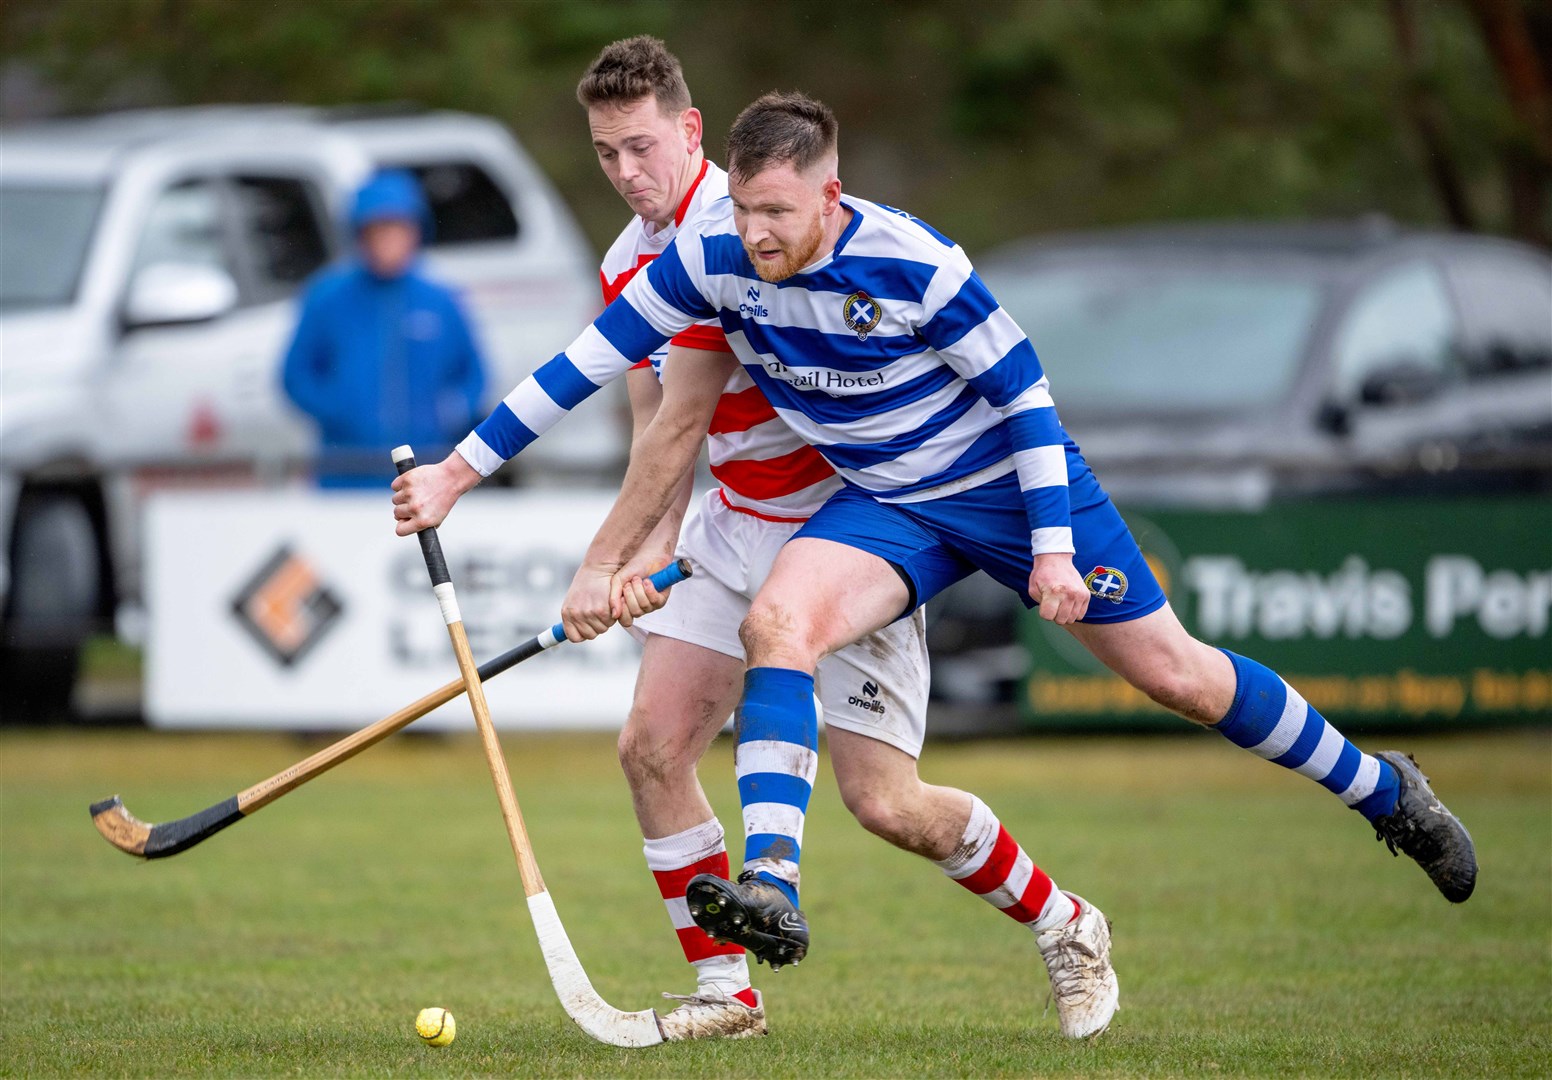 Newtonmore's Craig Ritchie with Barry Macdonald (Lochaber). Newtonmore v Lochaber in the Mowi Premiership, played at The Eilan, Newtonmore.